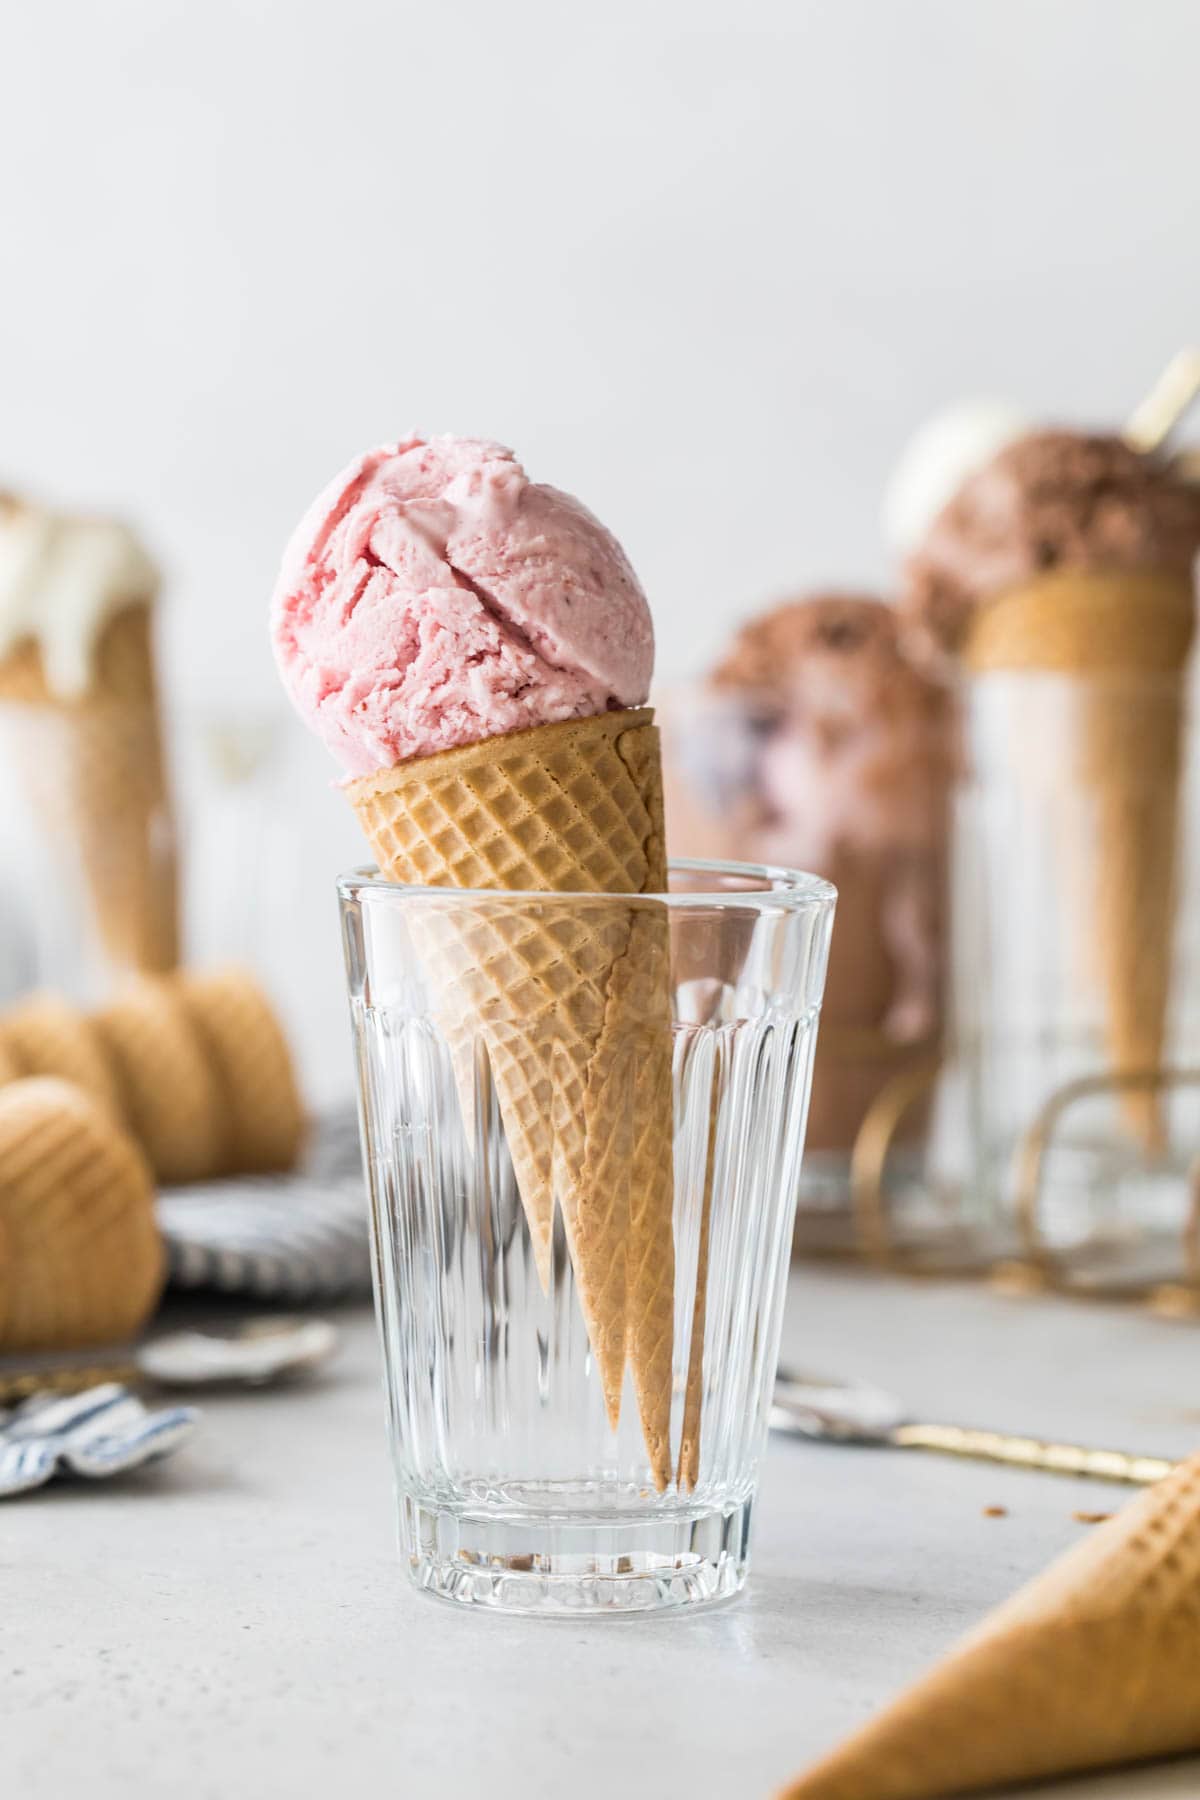 strawberry ice cream cone standing in a clear drinking glass